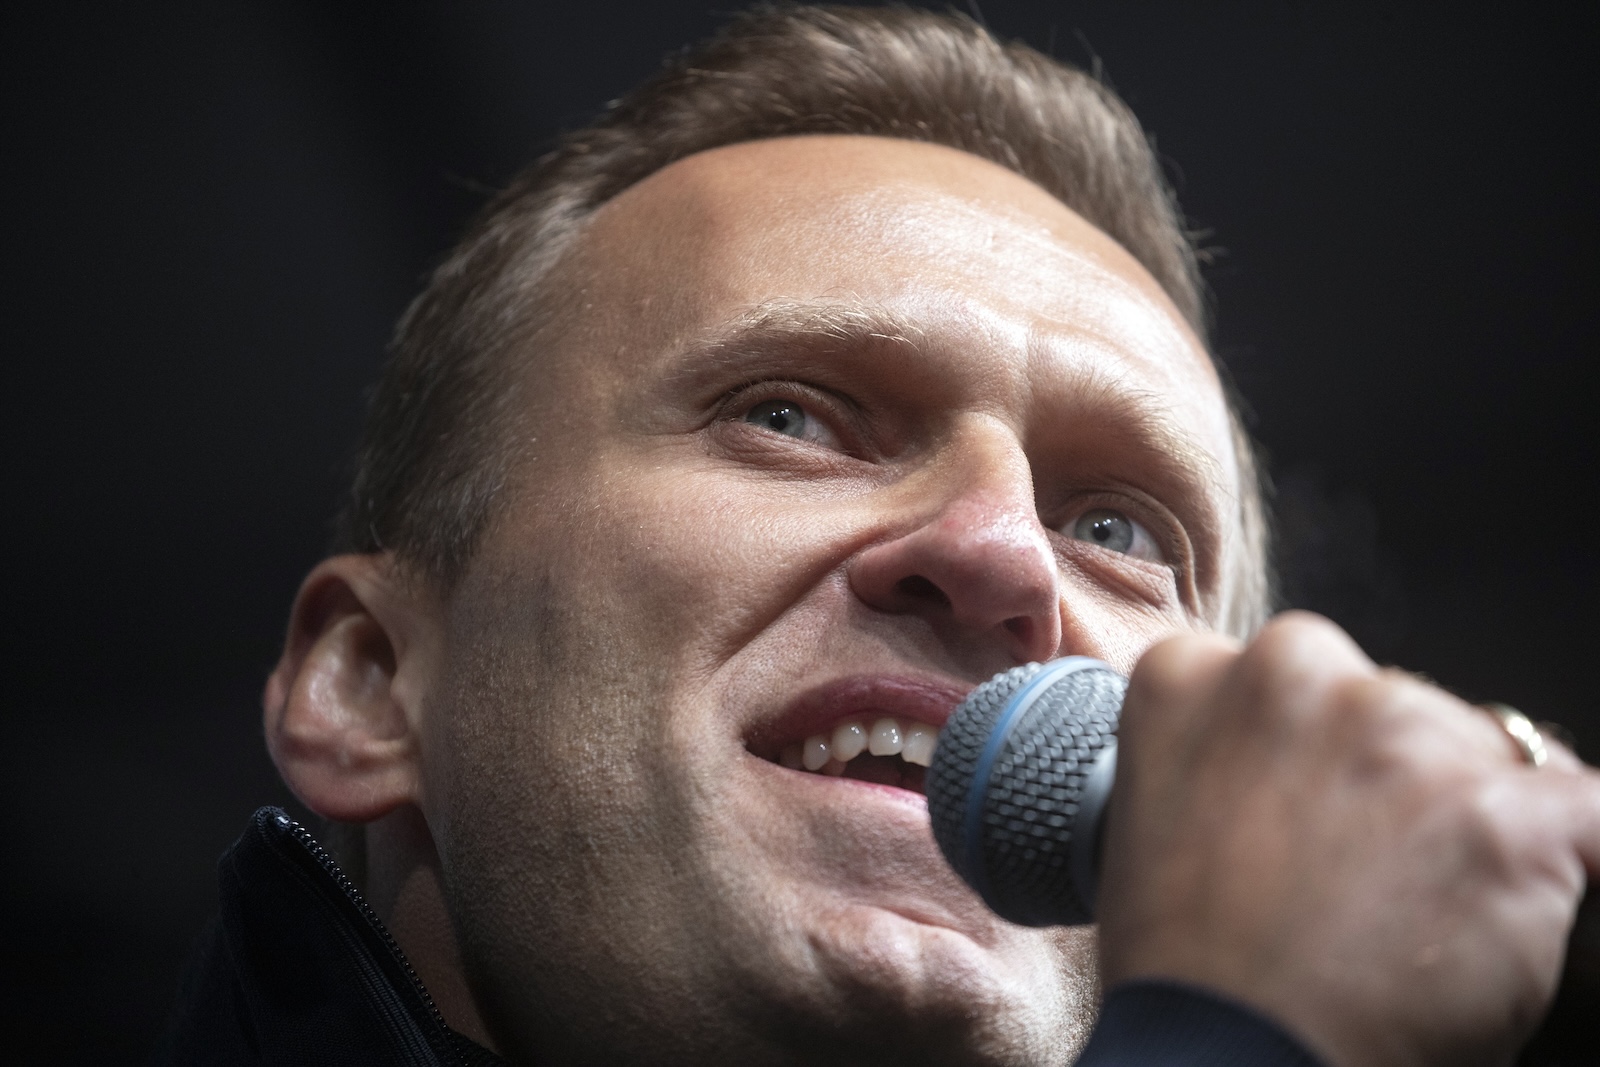 epa11157863 (FILE) - Russian opposition leader Alexey Navalny speaks during an opposition rally in support of political prisoners in Moscow, Russia, 29 September 2019 (reissued 16 February 2024). Russian opposition leader and outspoken Kremlin critic Alexey Navalny has died aged 47 in a penal colony, the Federal Penitentiary Service of the Yamalo-Nenets Autonomous District announced on 16 February 2024. A prison service statement said that Navalny 'felt unwell' after a walk on 16 February, and it was investigating the causes of his death. Late last year, he was transferred to an Arctic penal colony considered one of the harshest prisons.  EPA/SERGEI ILNITSKY *** Local Caption *** 56288067